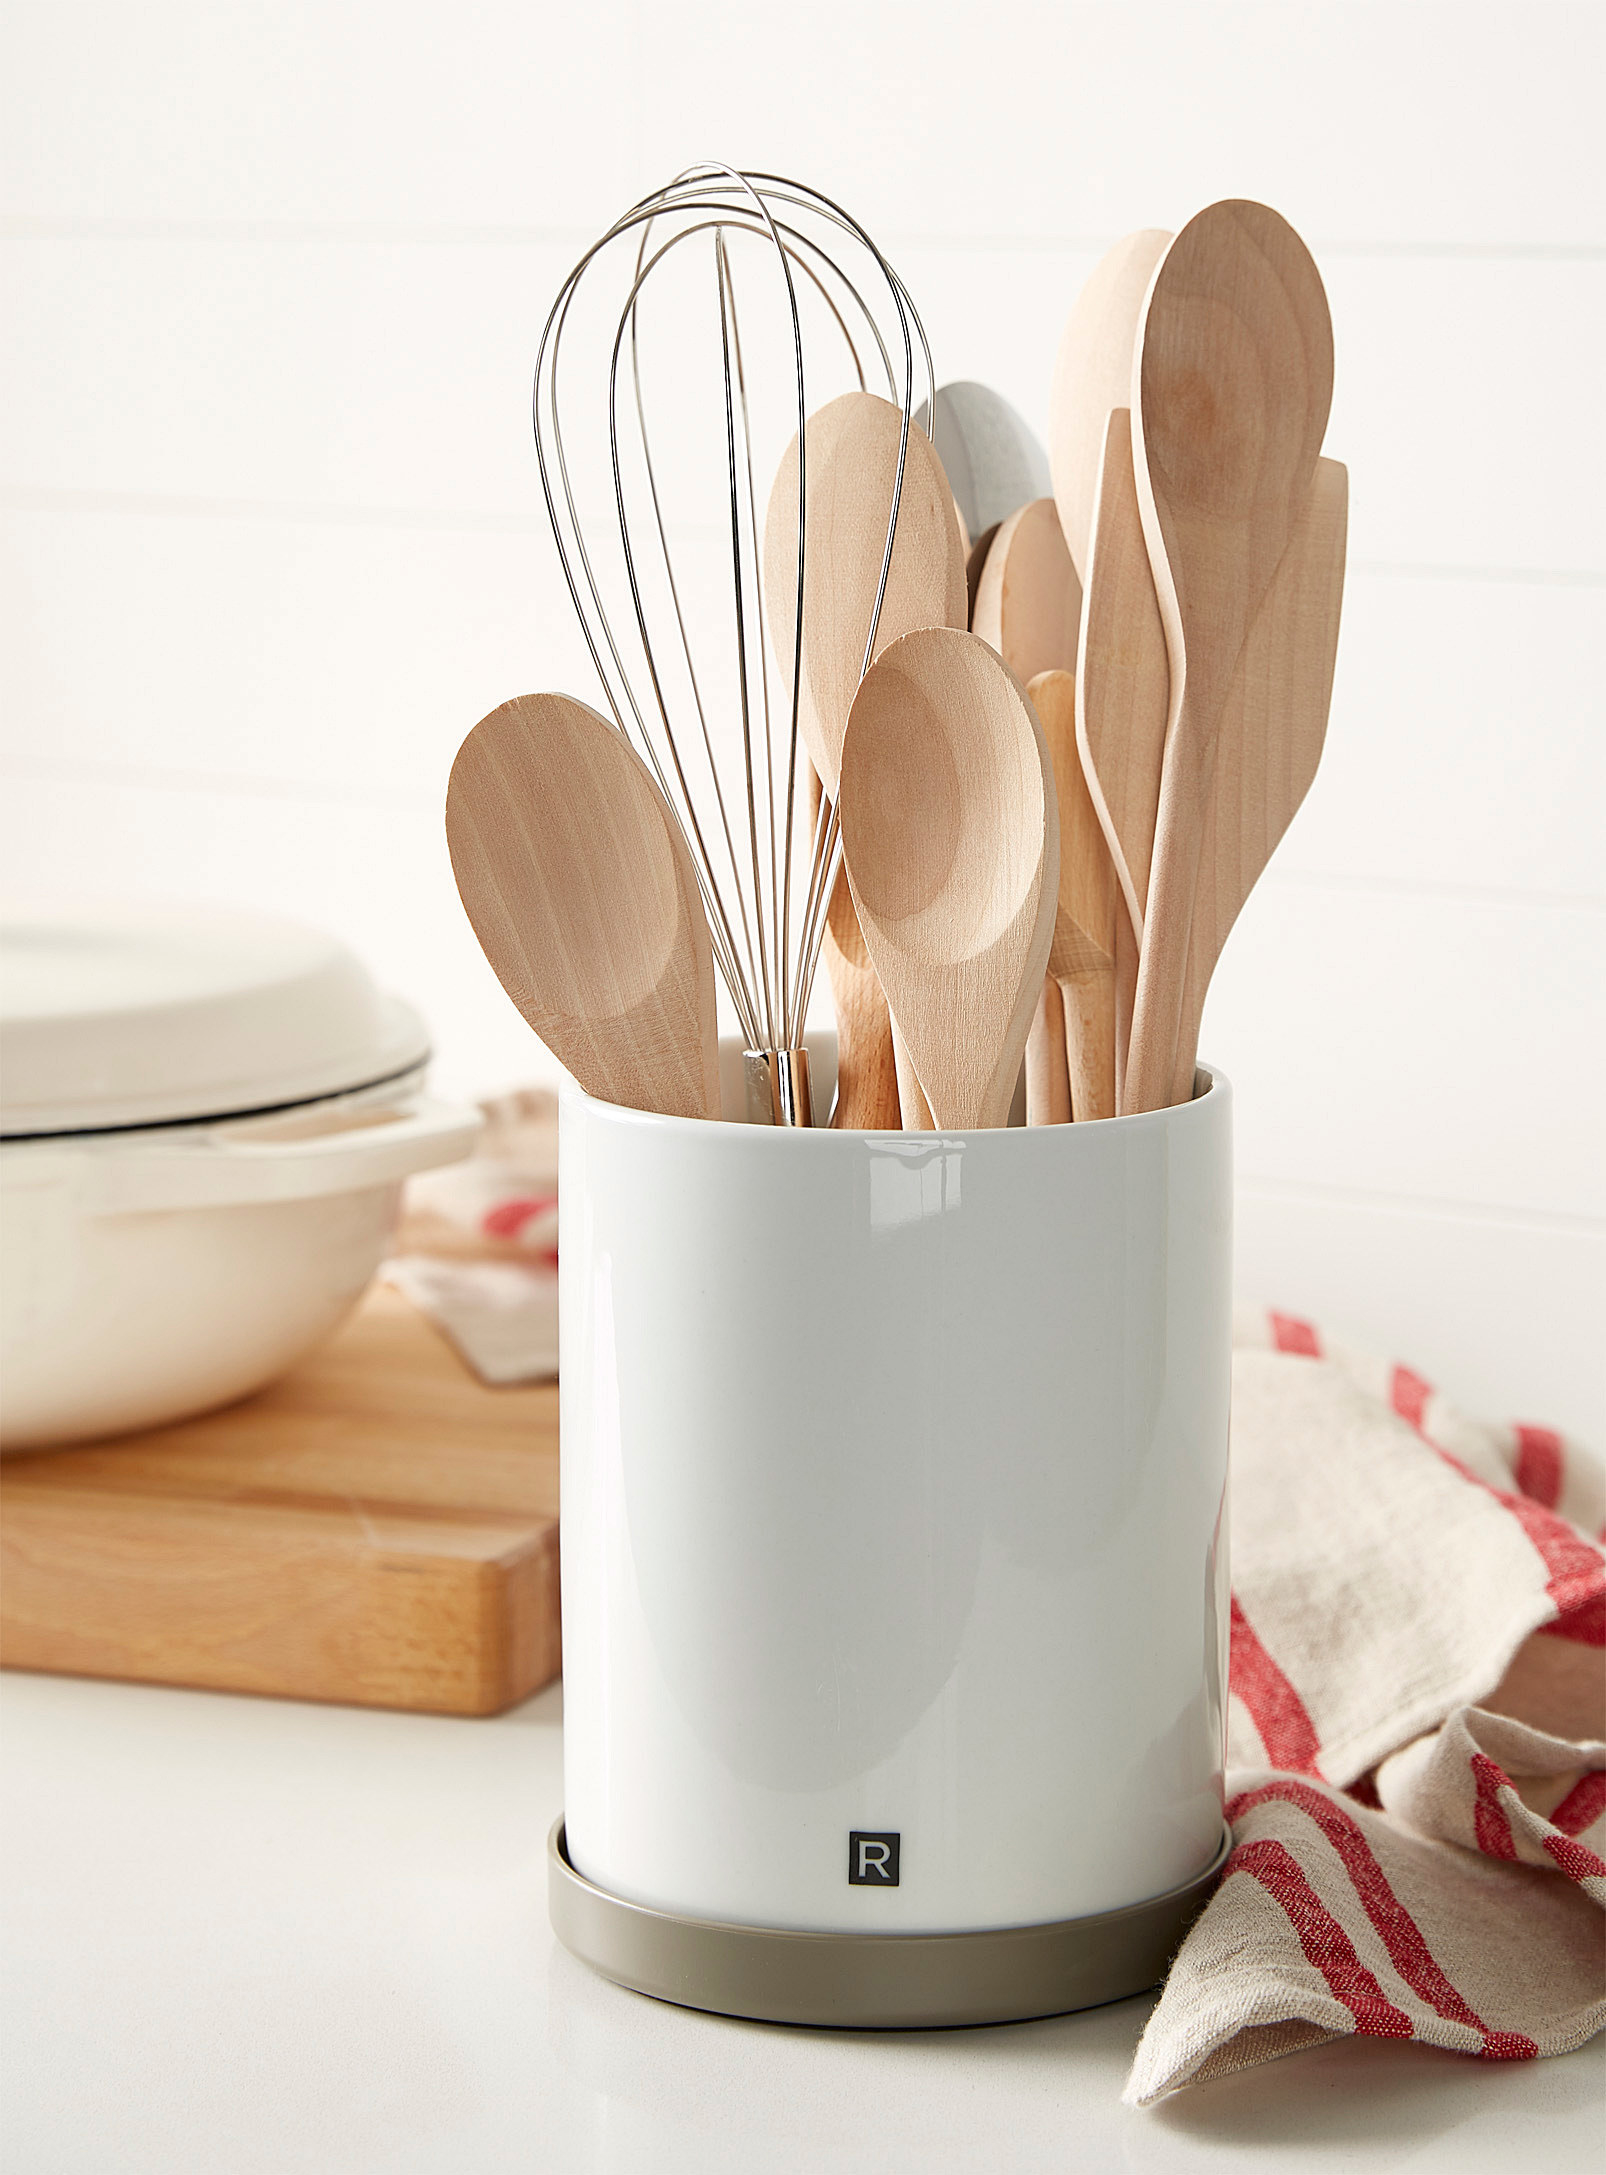 A large porcelain utensil holder filled with wooden spoons and a whisk